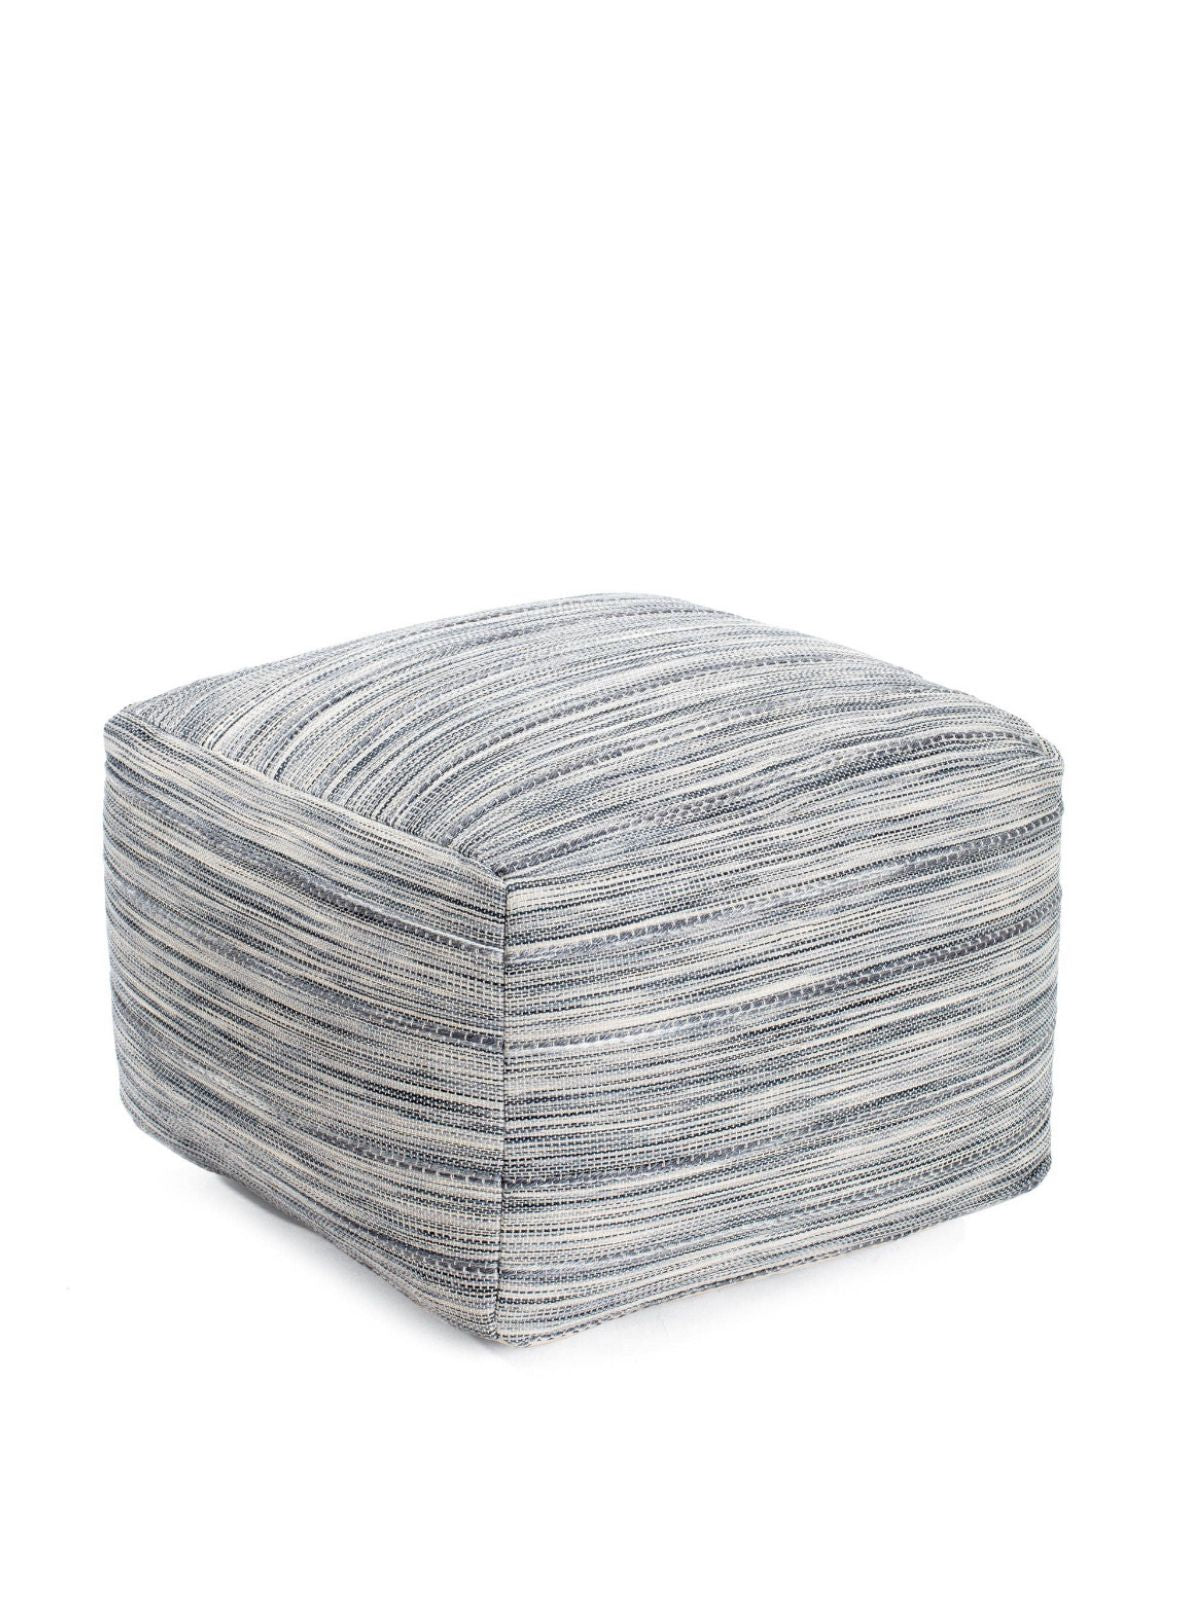 The Gioia Pouf In Grey/Blue is Upholstered in a fabric blend that is handcrafted by skilled weavers, 